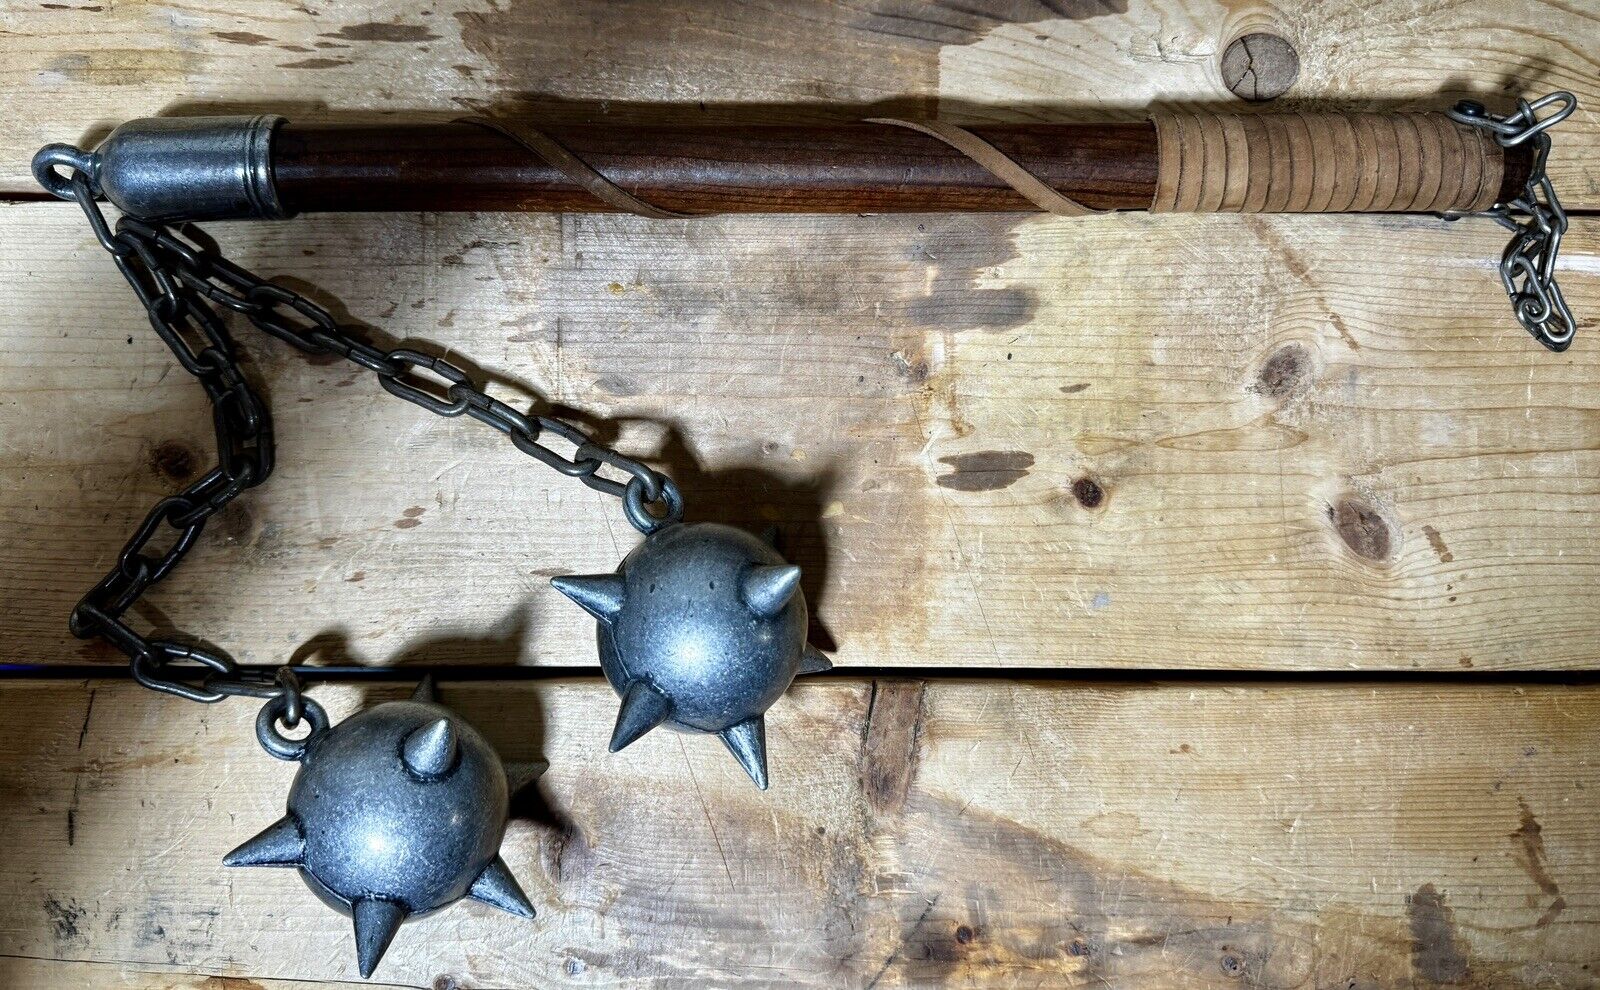 Medieval Warrior Spiked Solid Metal Double Mace Ball Flail Morningstar Weapon